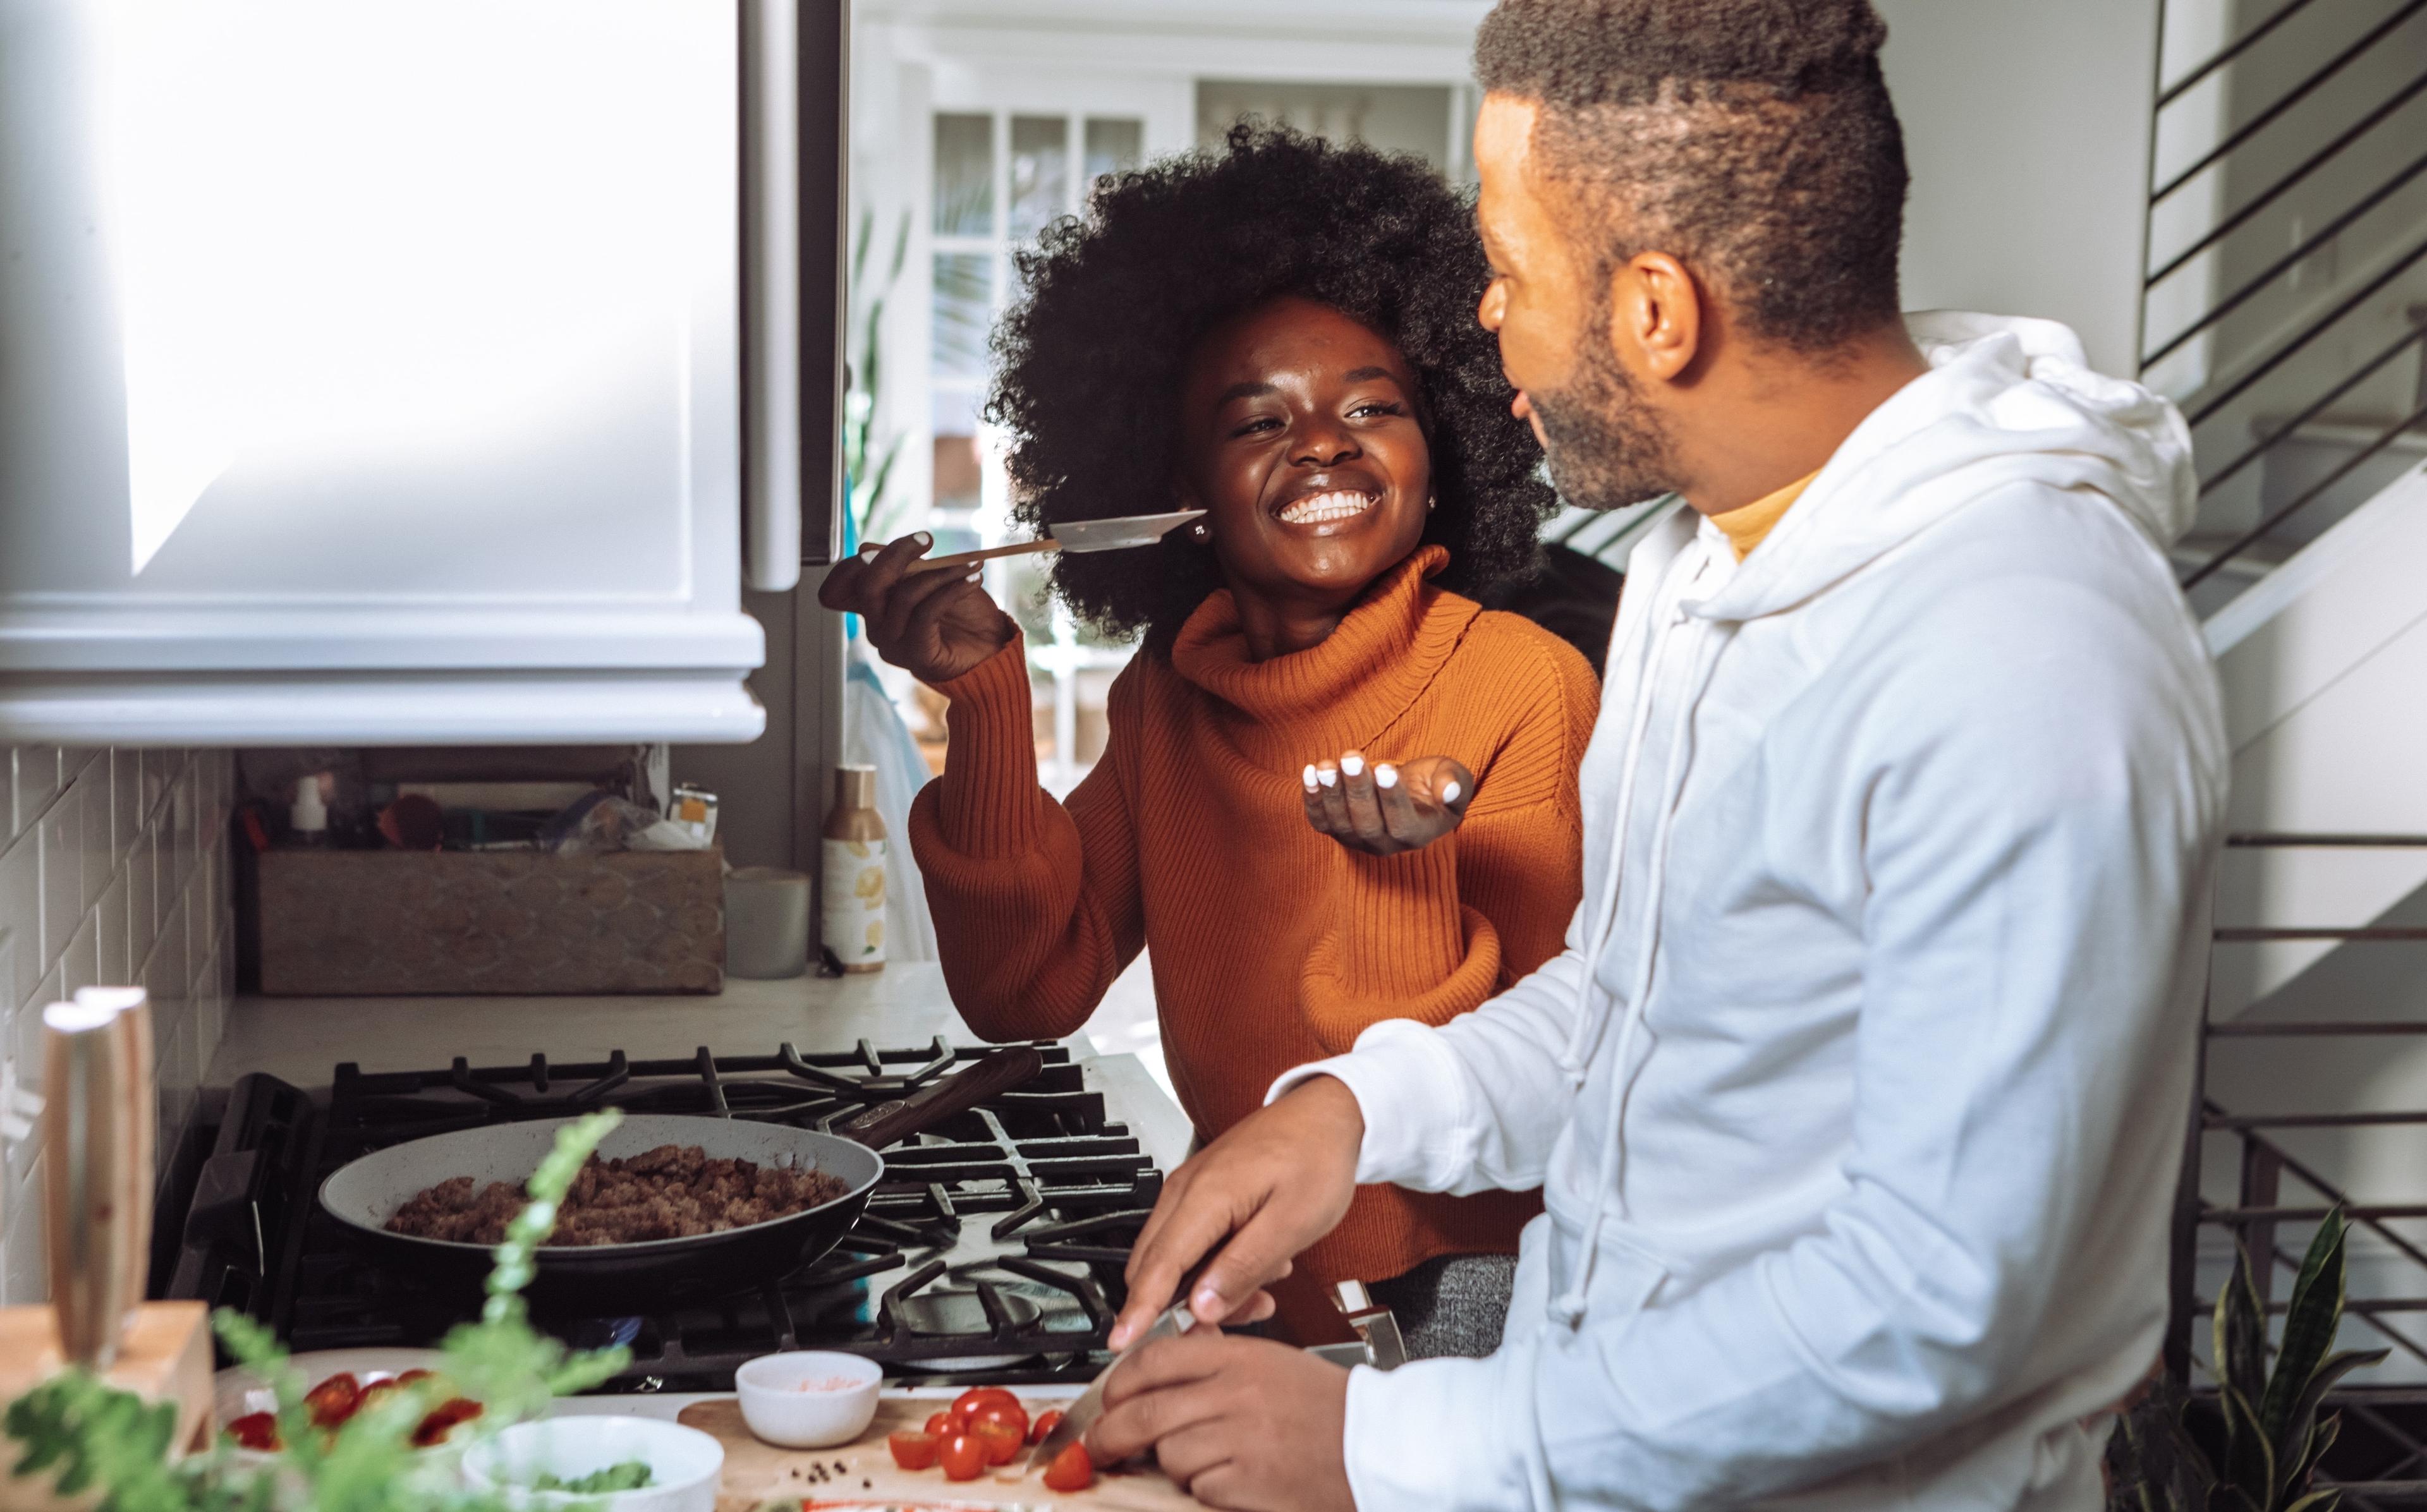 A man and a woman stand smiling in front of their stove while cooking ground meat and chopping tomatoes.